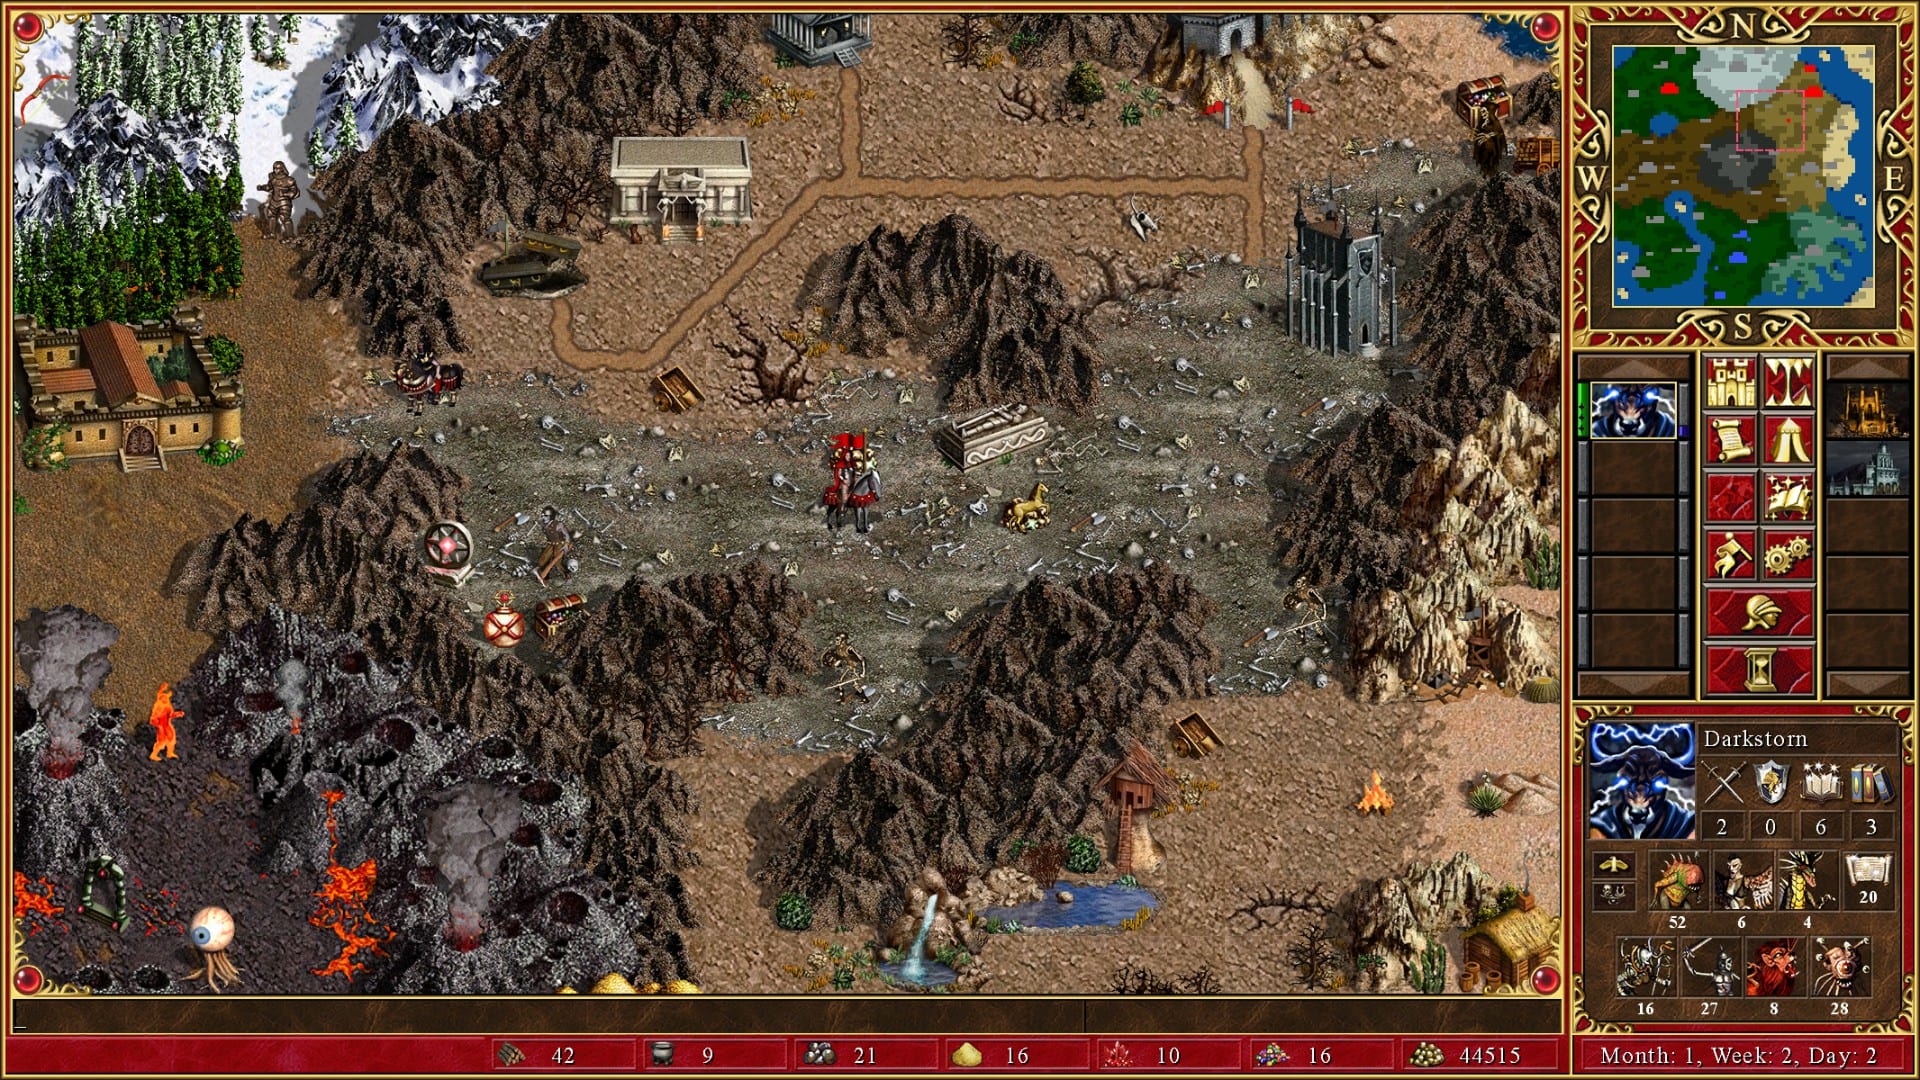 Heroes of might and magic 3 full version windows 8 1